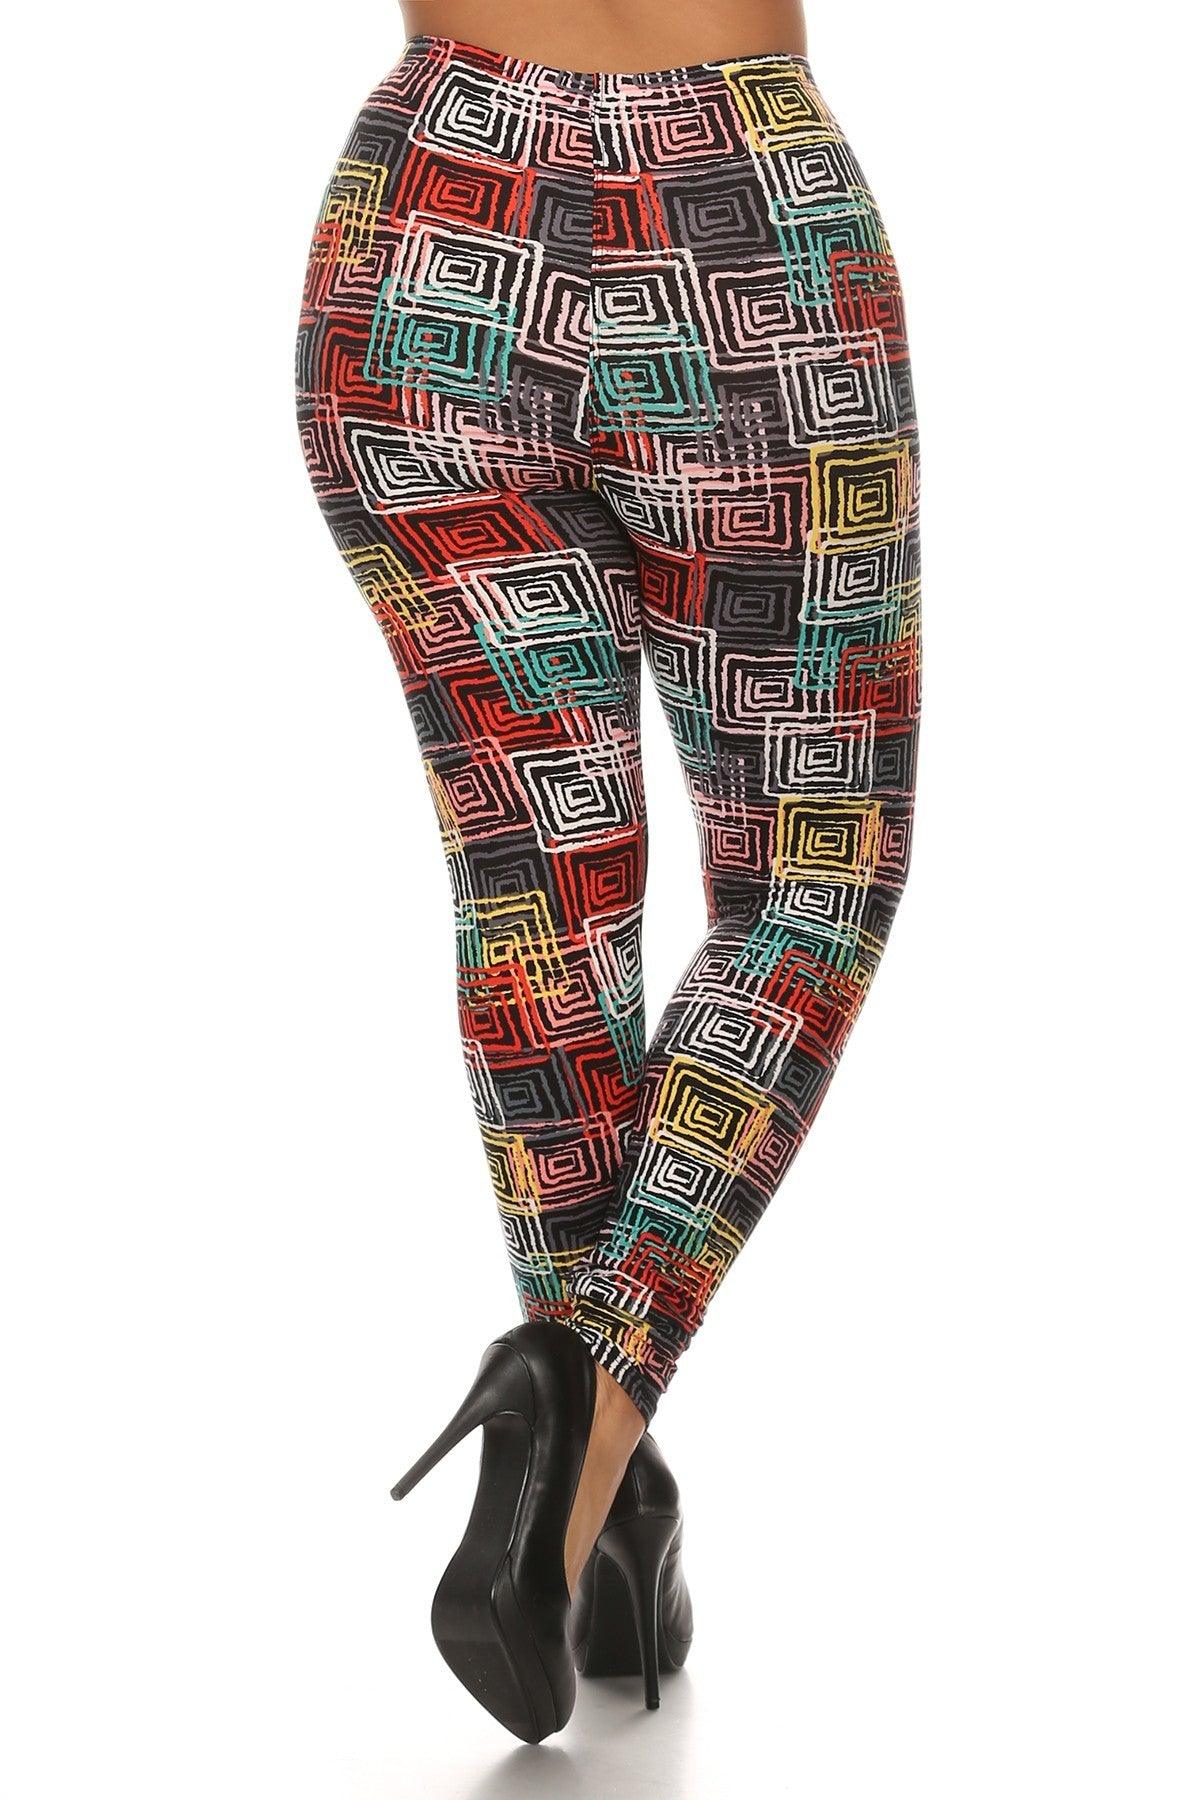 Abstract Geometric Printed Knit Legging With Elastic Waistband, And High Waist Fit - Kreative Passions